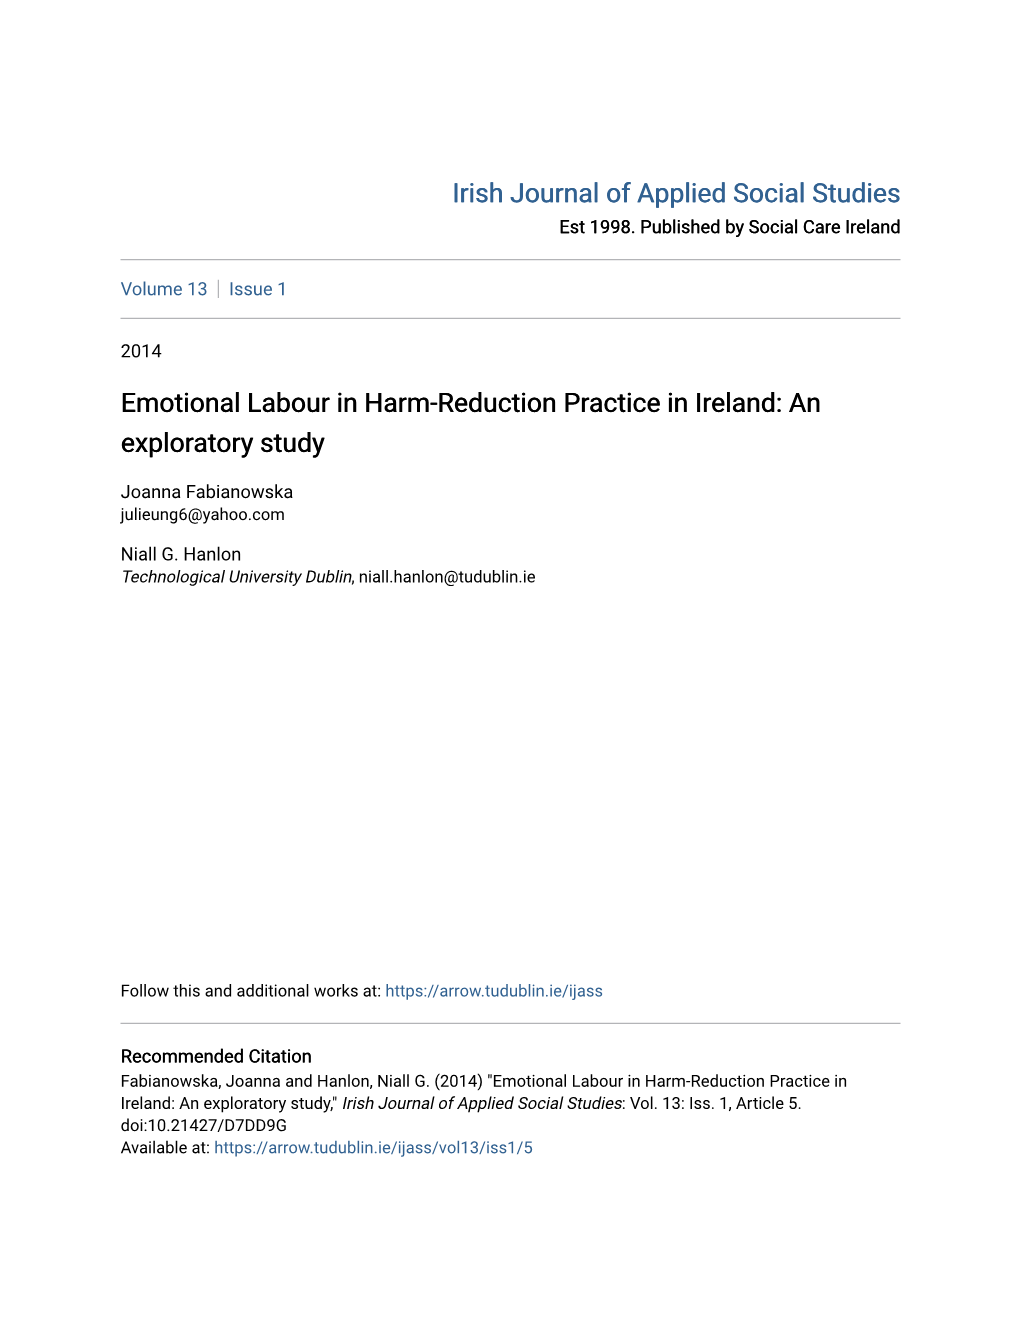 Emotional Labour in Harm-Reduction Practice in Ireland: an Exploratory Study